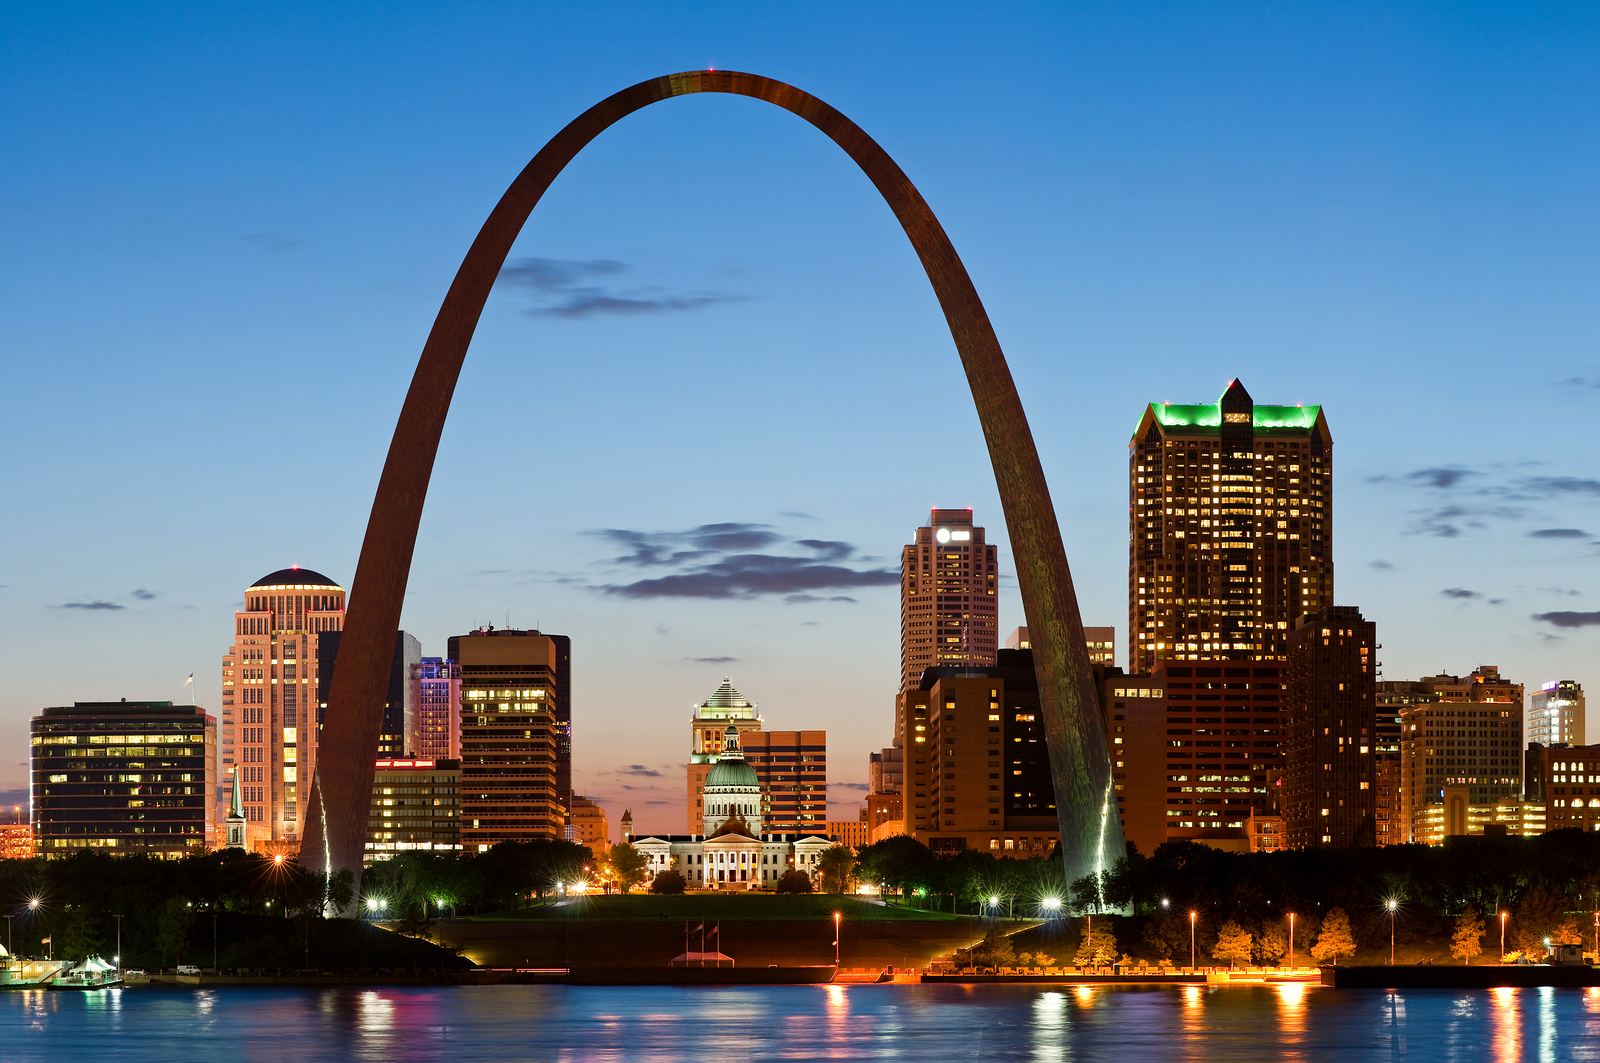 See the Gateway Arch in St Louis.